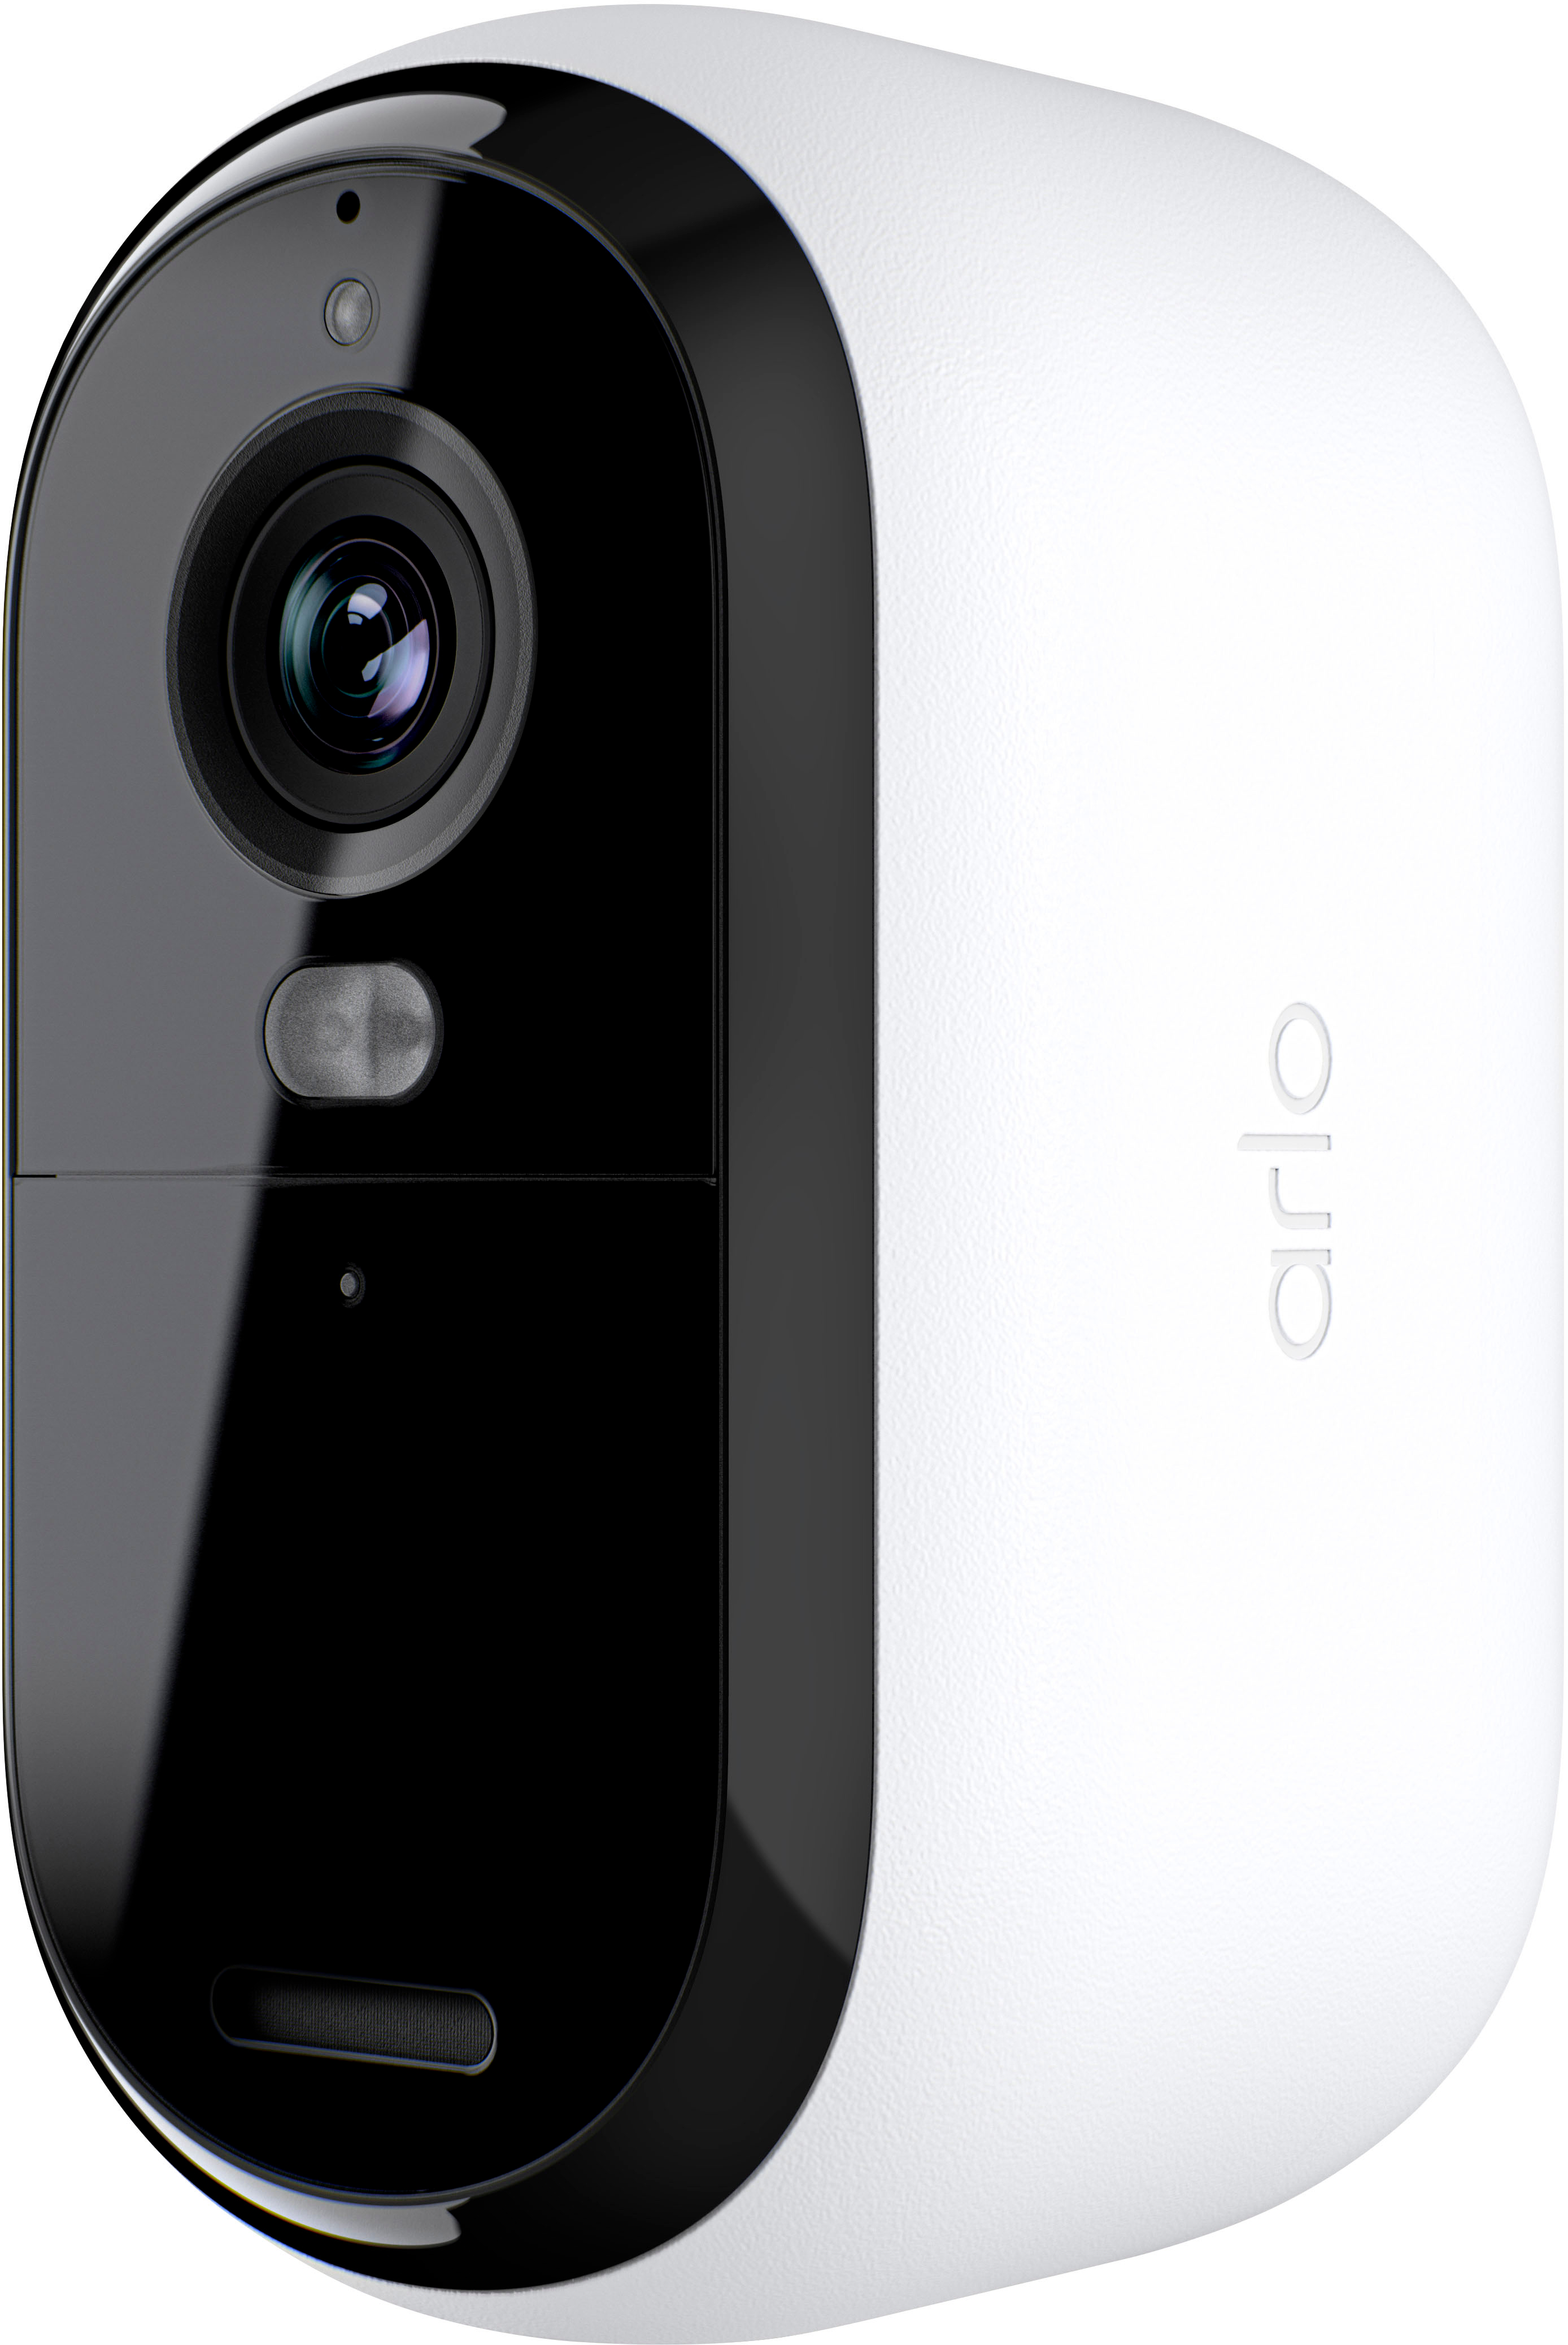 Arlo Pro - Add-on Camera | Rechargeable, Night Vision, Indoor/Outdoor, HD  Video, 2-Way Audio, Wall Mount | Cloud Storage Included | Works with Arlo